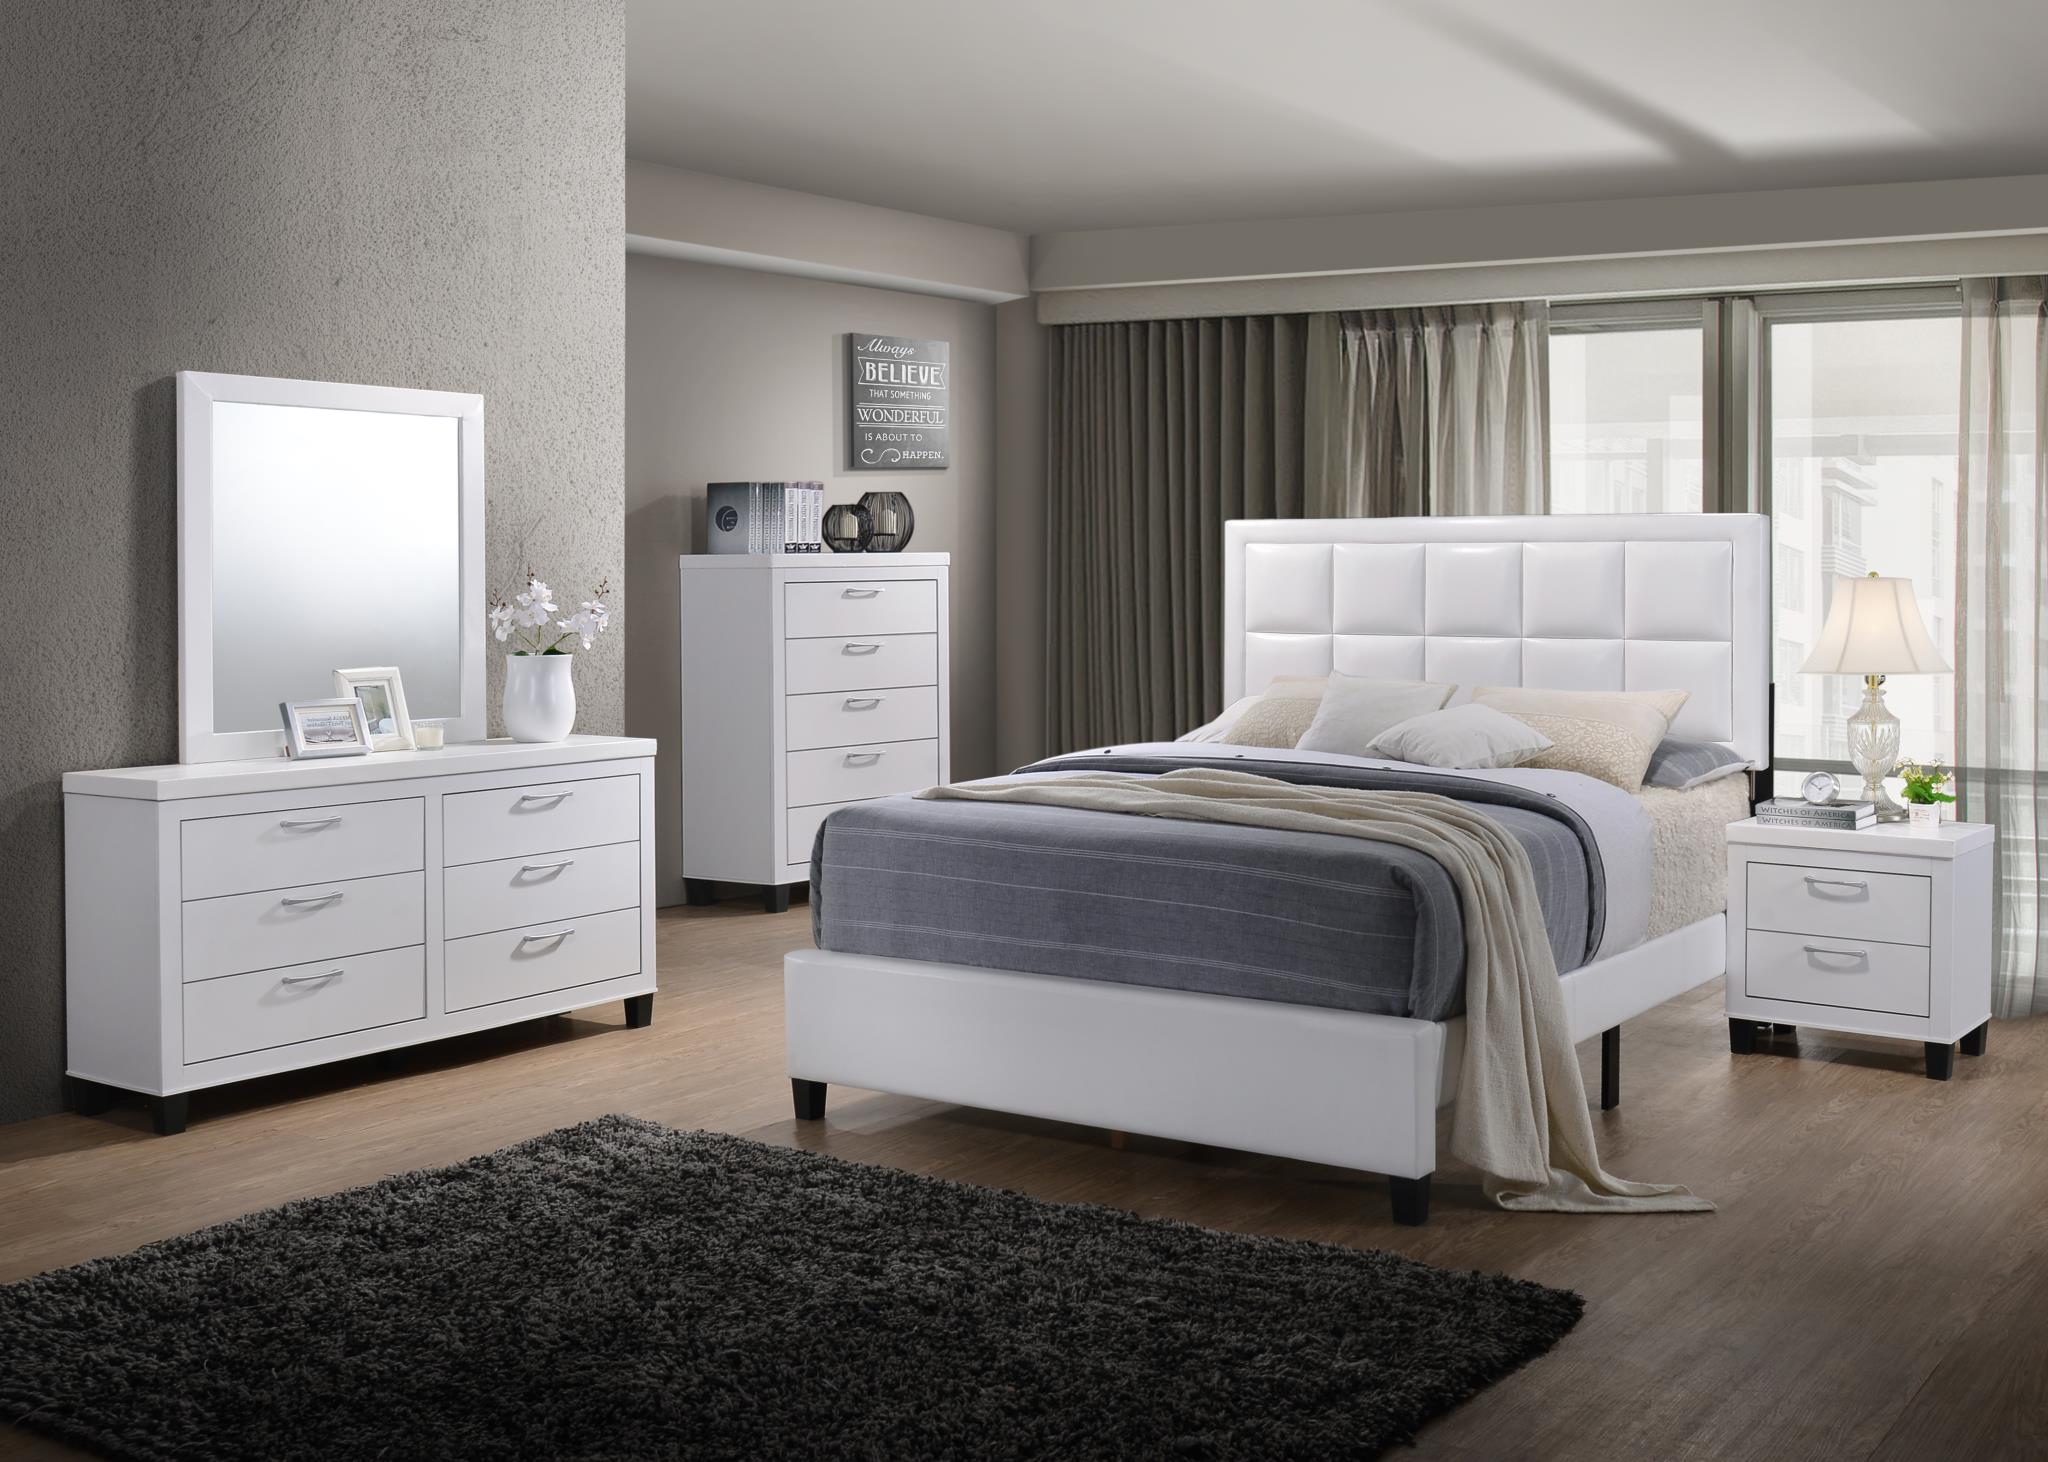 GTU Furniture Contemporary Styling White 4Pc Queen Bedroom Set - image 1 of 5